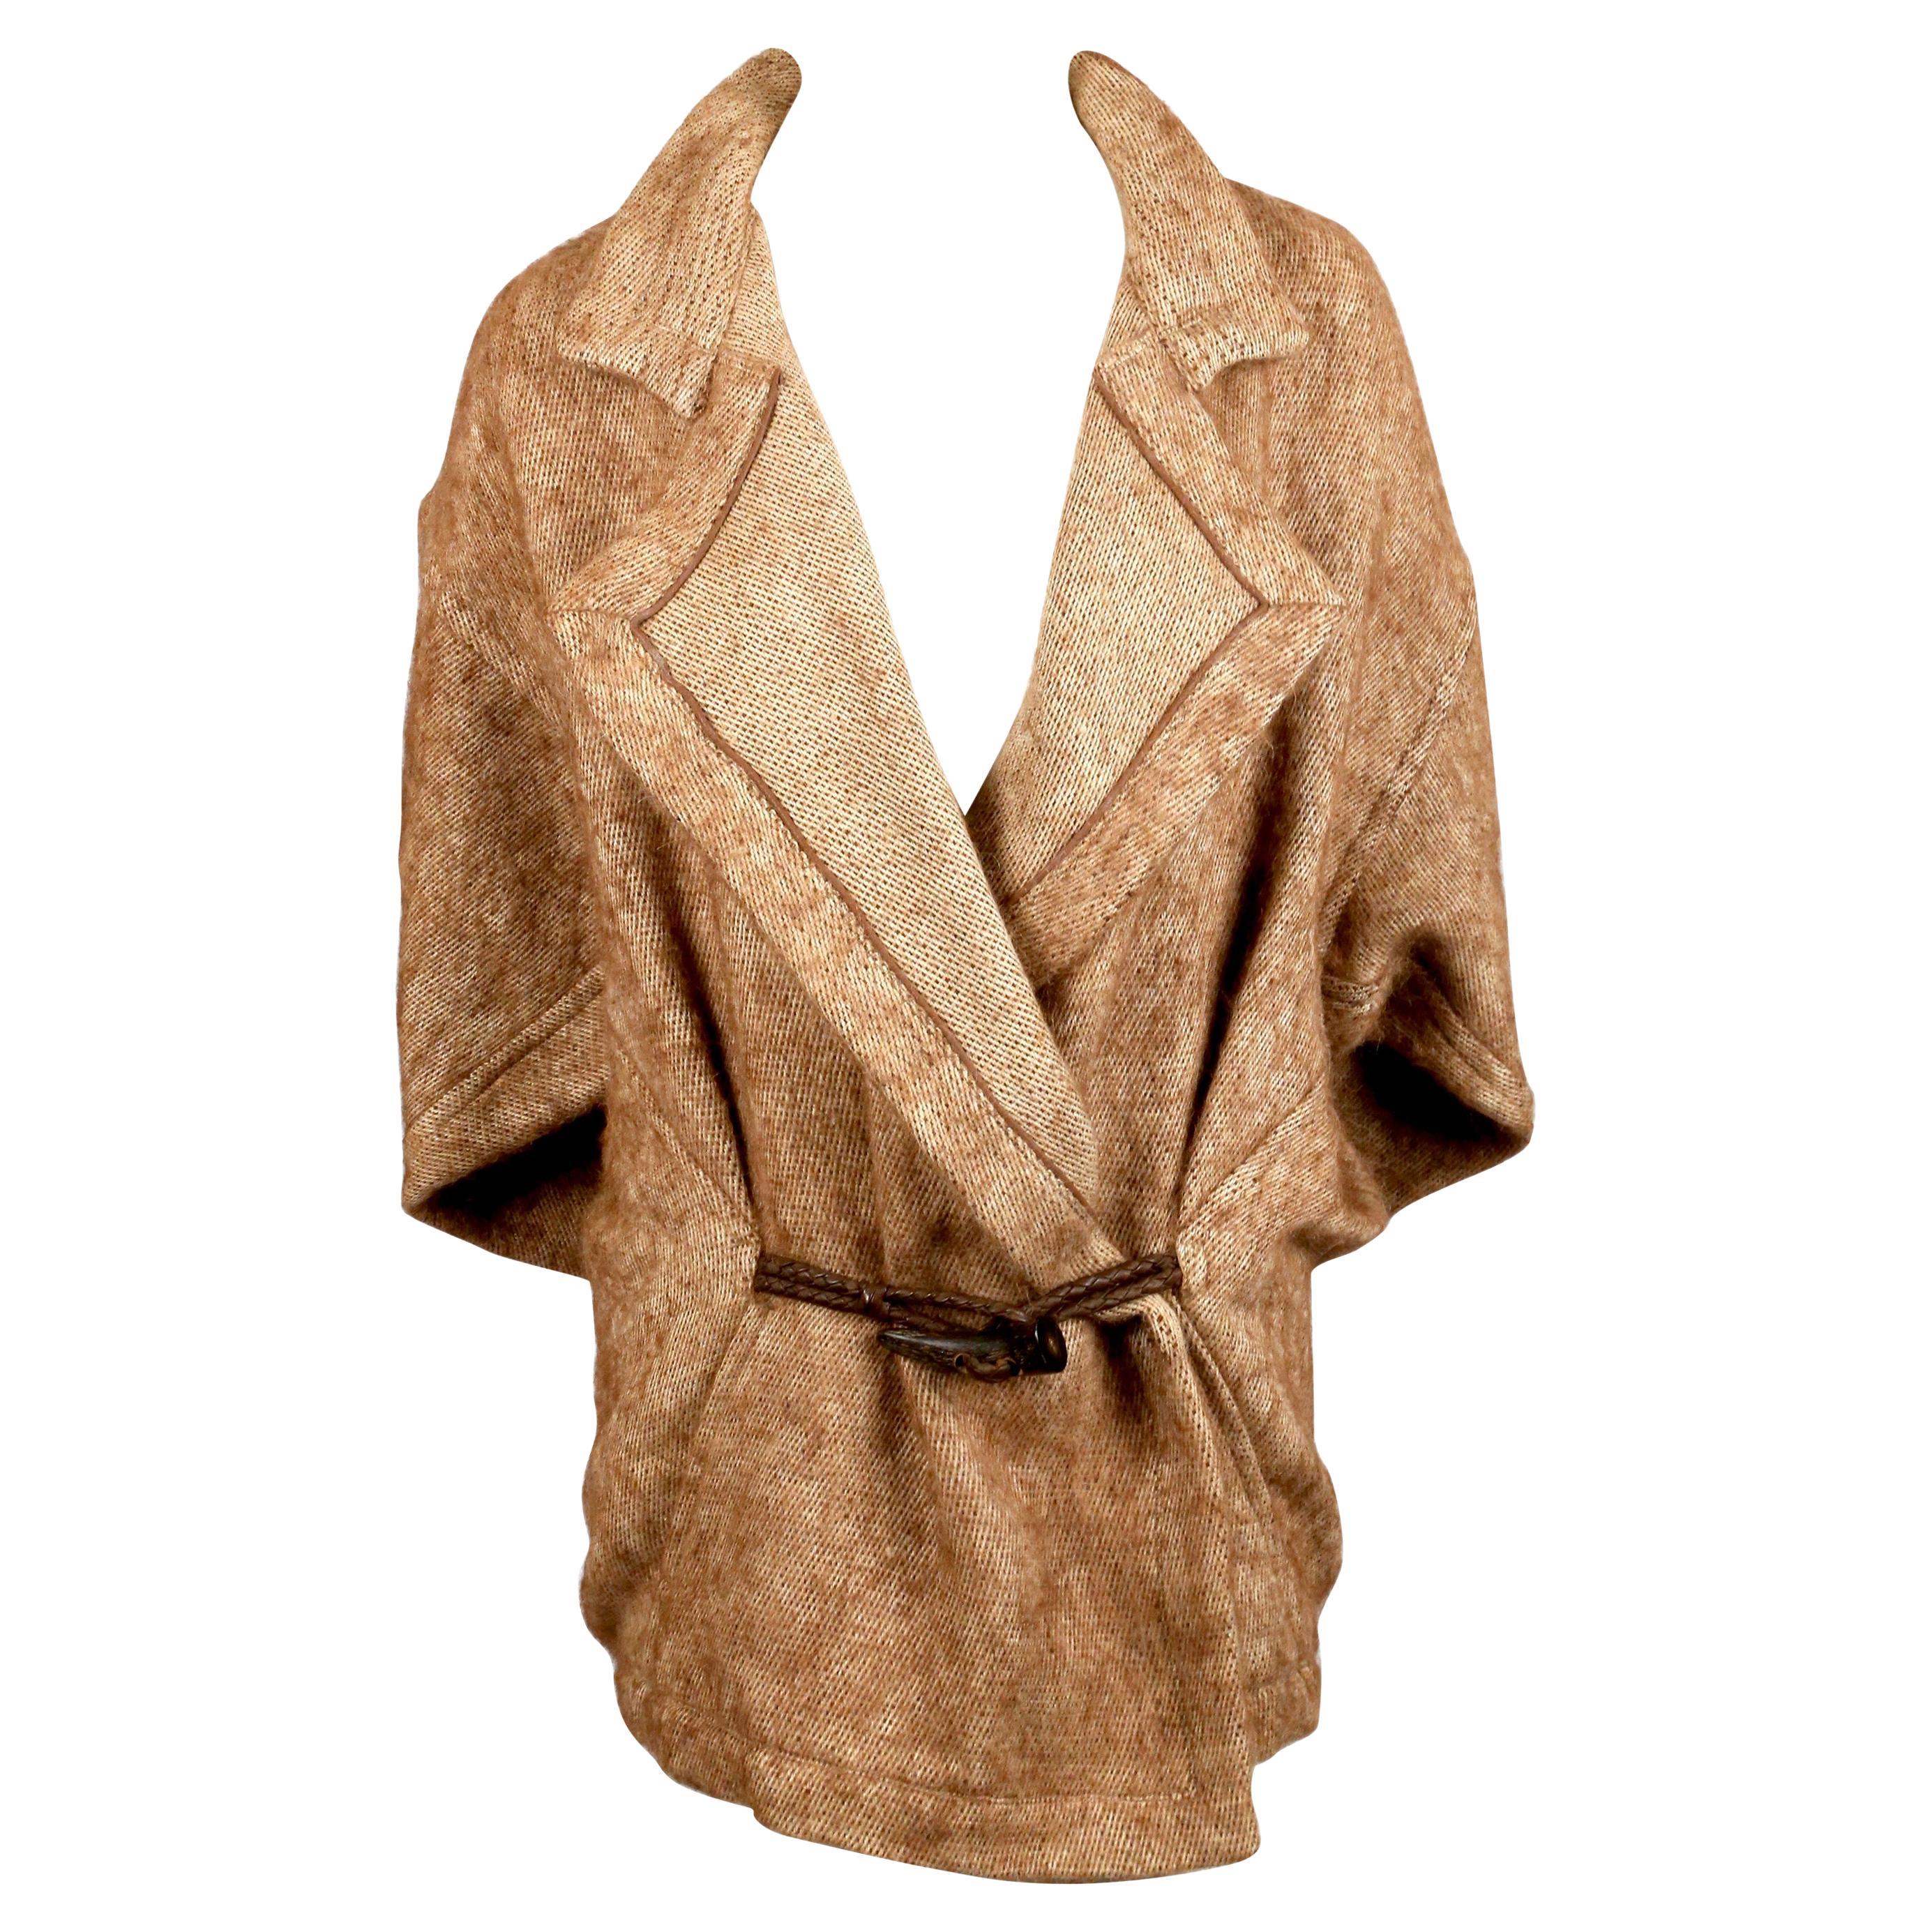 1984 ISSEY MIYAKE alpaca and linen RUNWAY coat with horn toggle closure.  For Sale